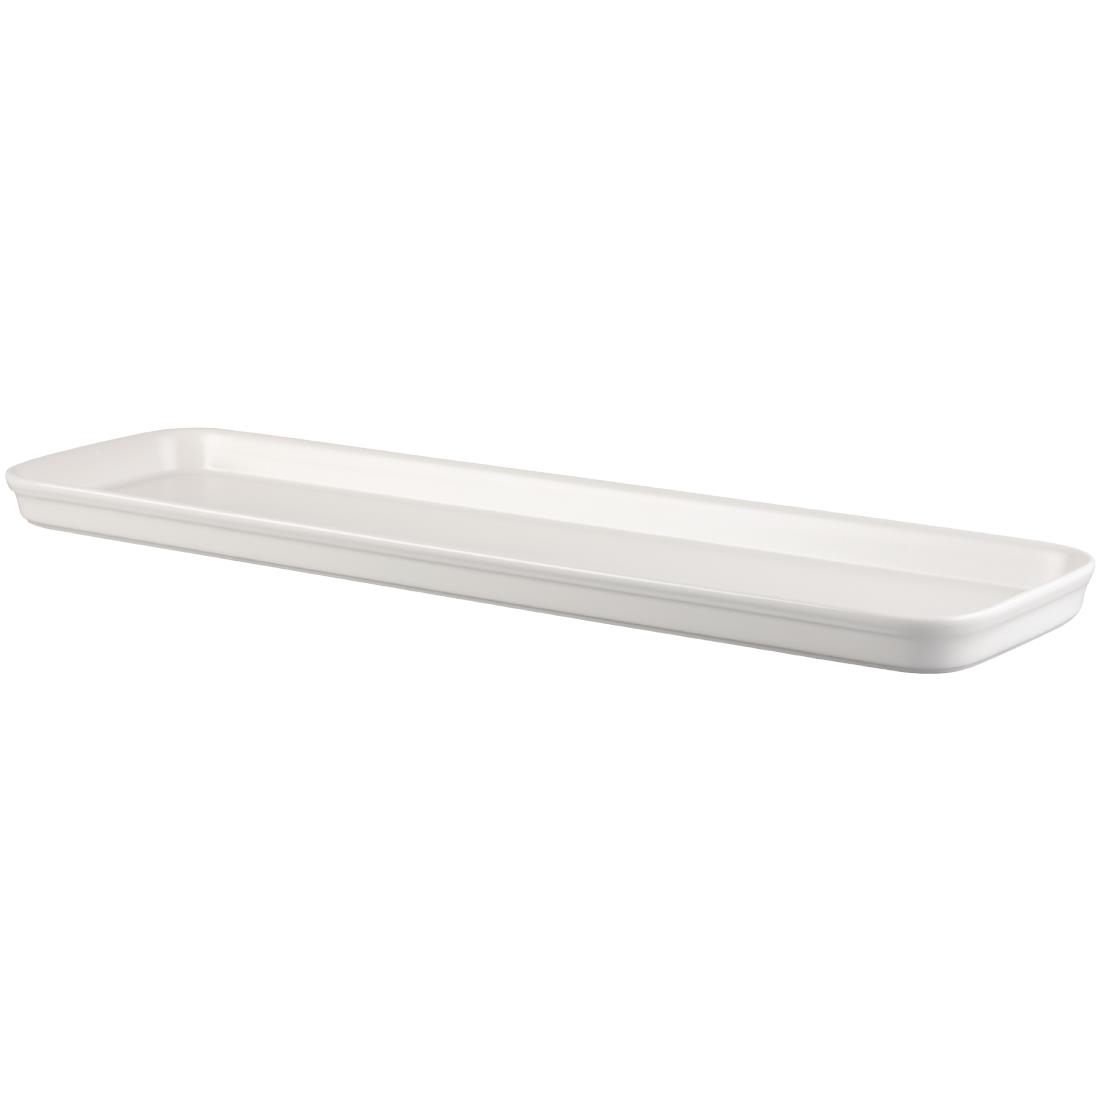 Churchill Counter Serve Flat Trays 530x 150mm (Pack of 4)